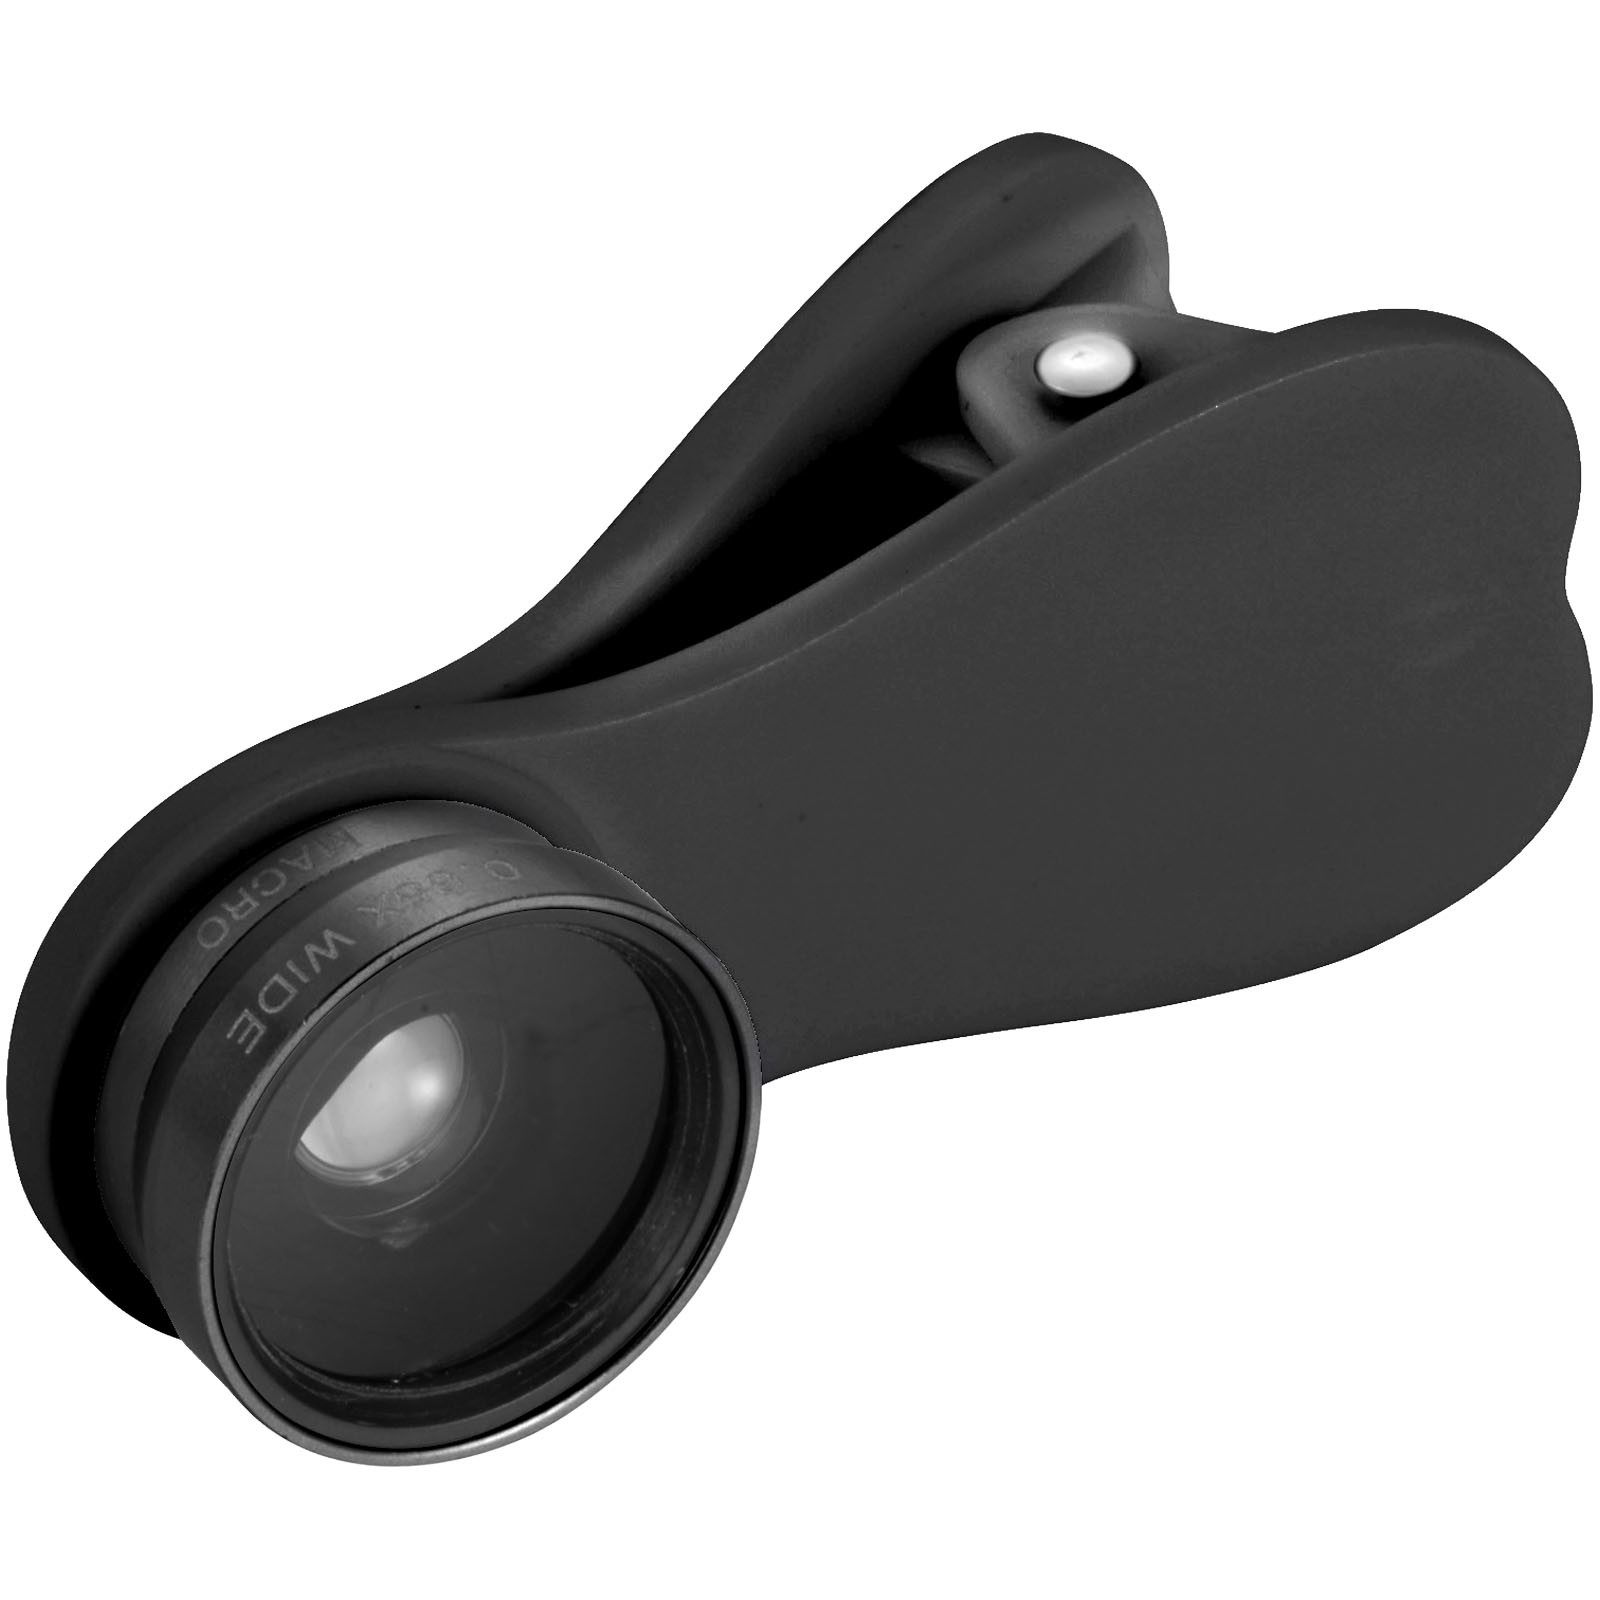 Optic wide-angle and macro smartphone camera lens - Solid Black